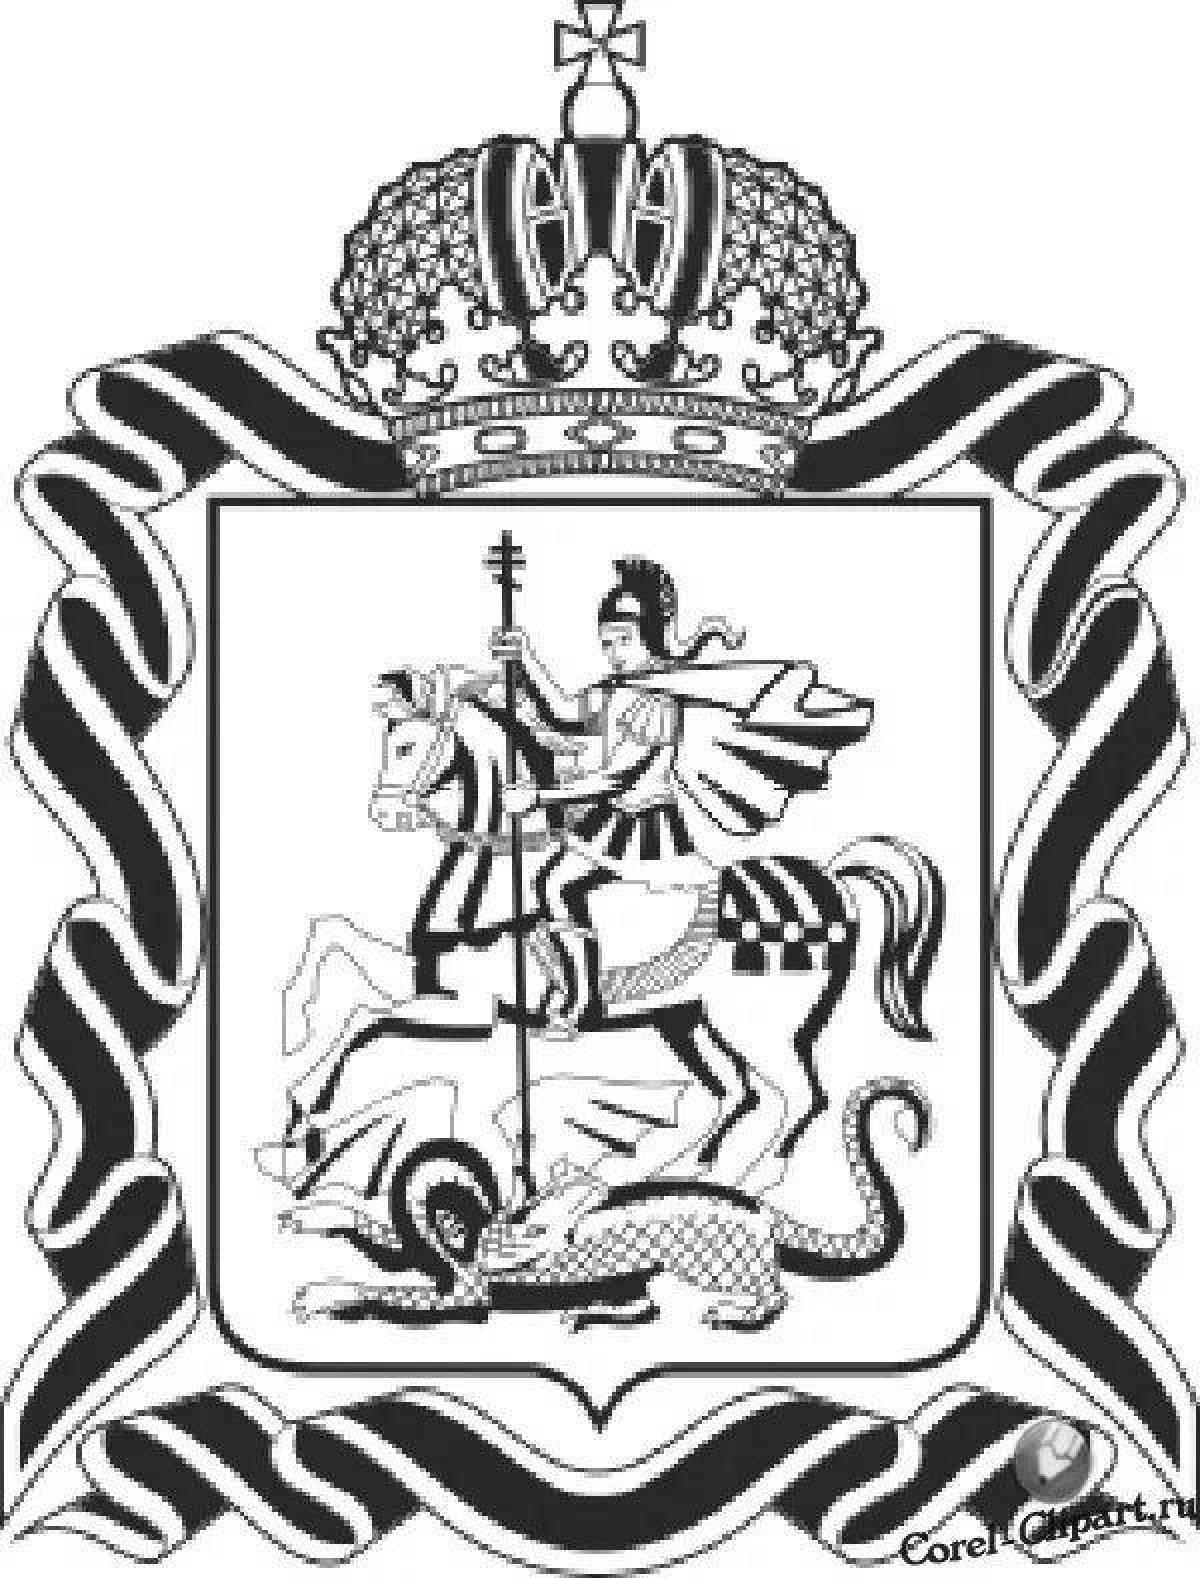 Moscow coat of arms #5